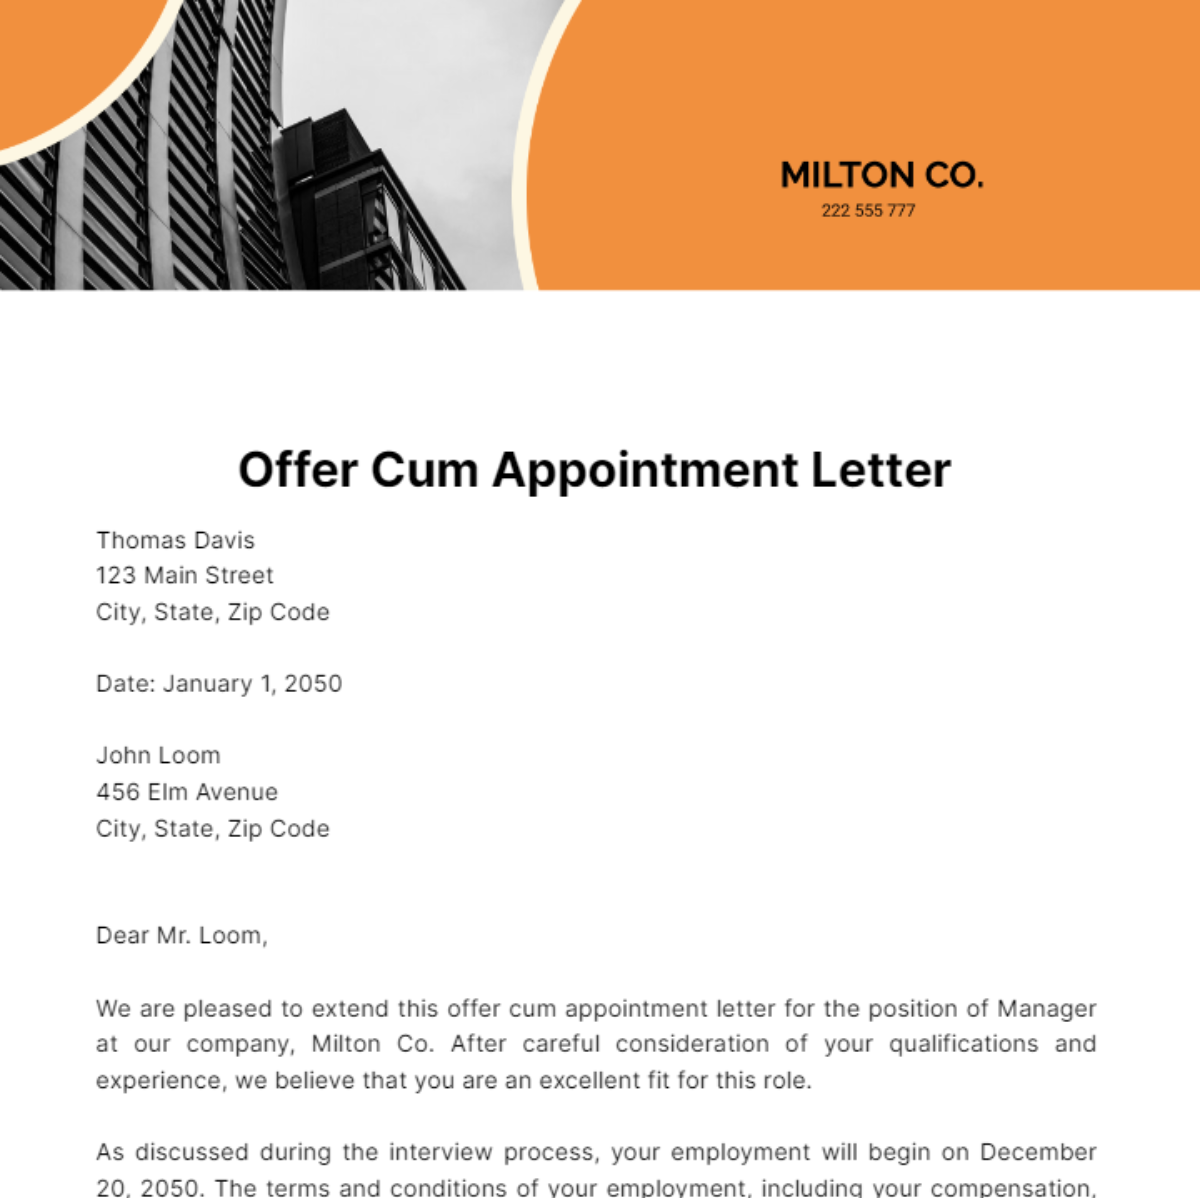 Offer Cum Appointment Letter Template